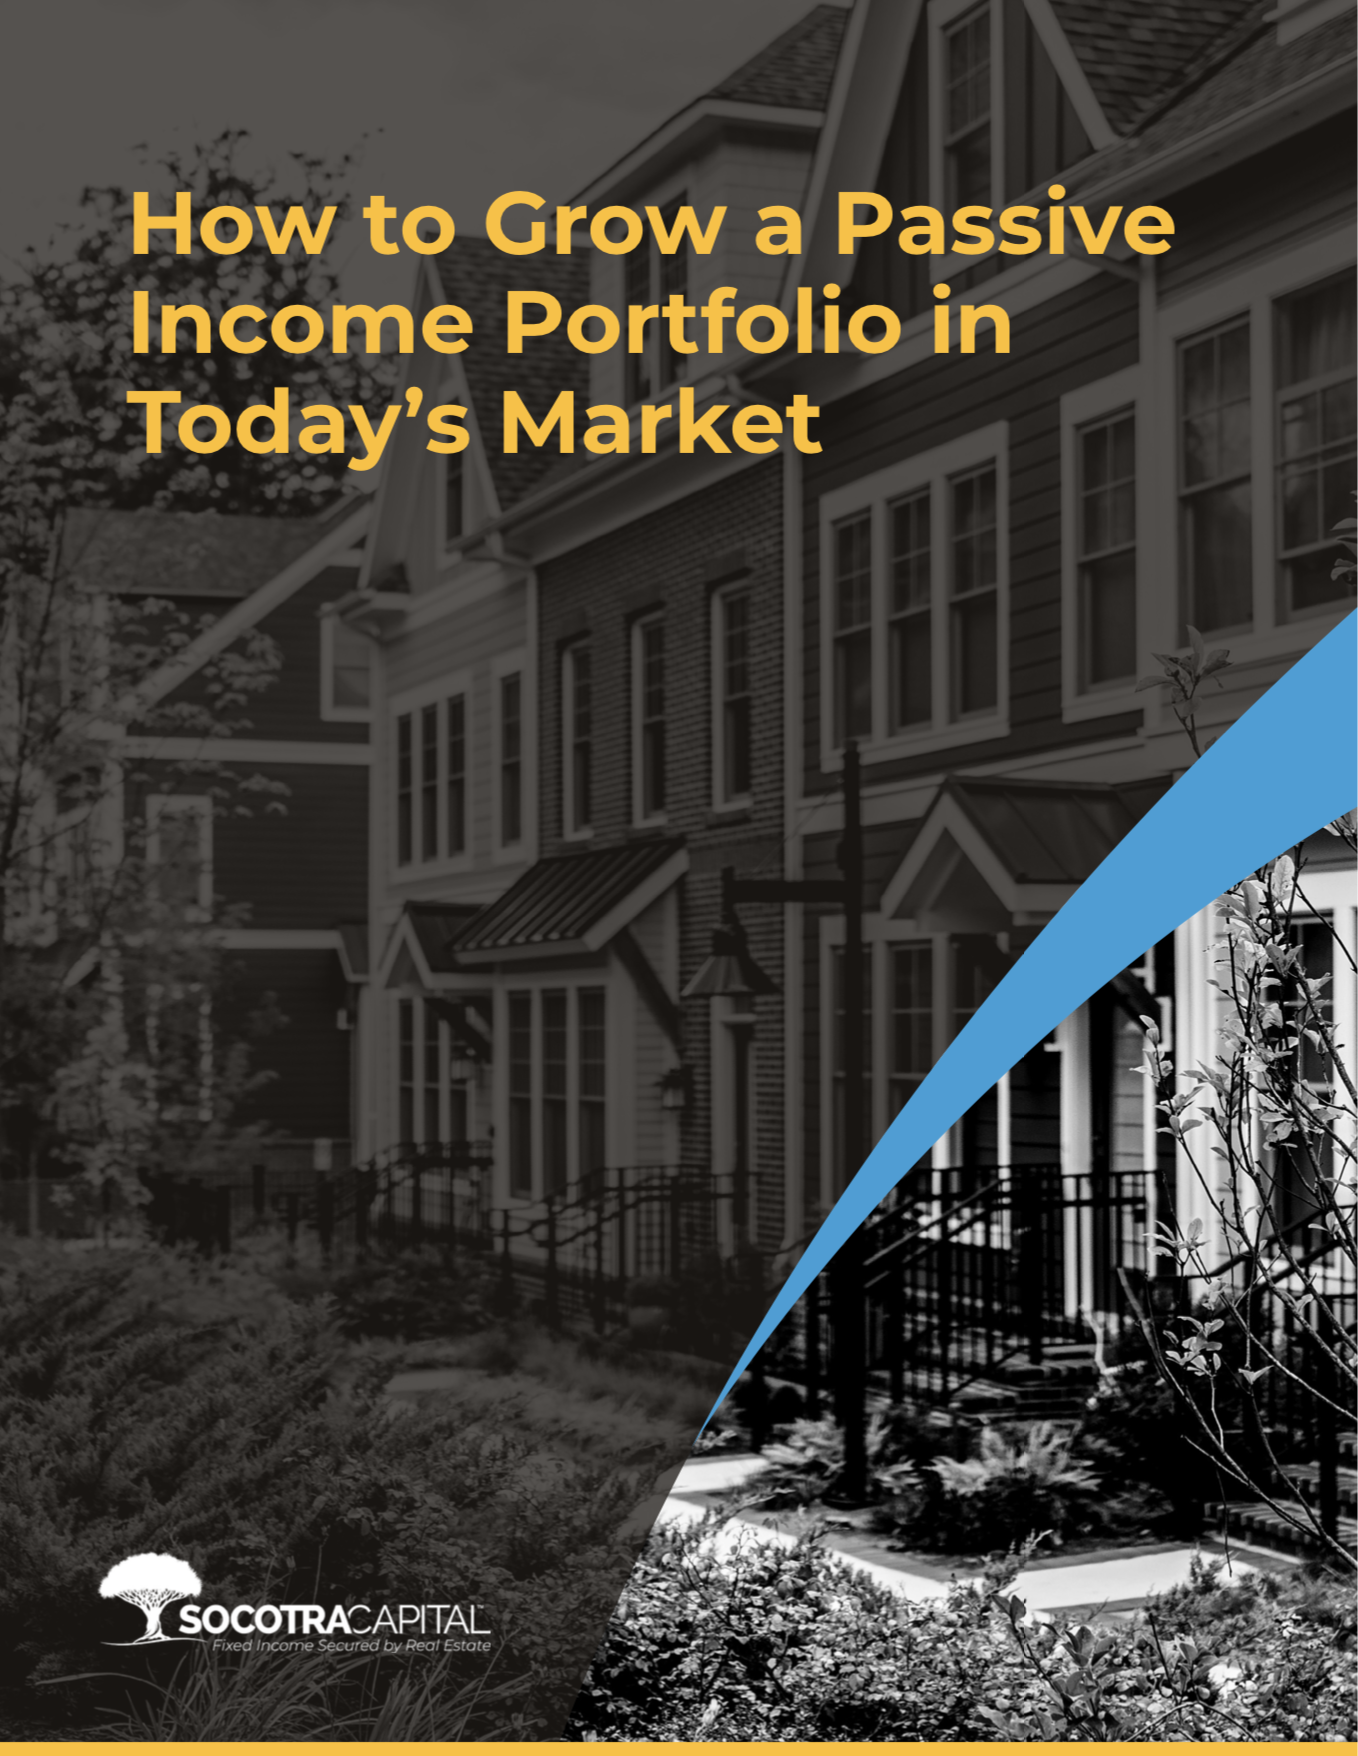 How to Grow a Passive Income Portfolio in Todays Market